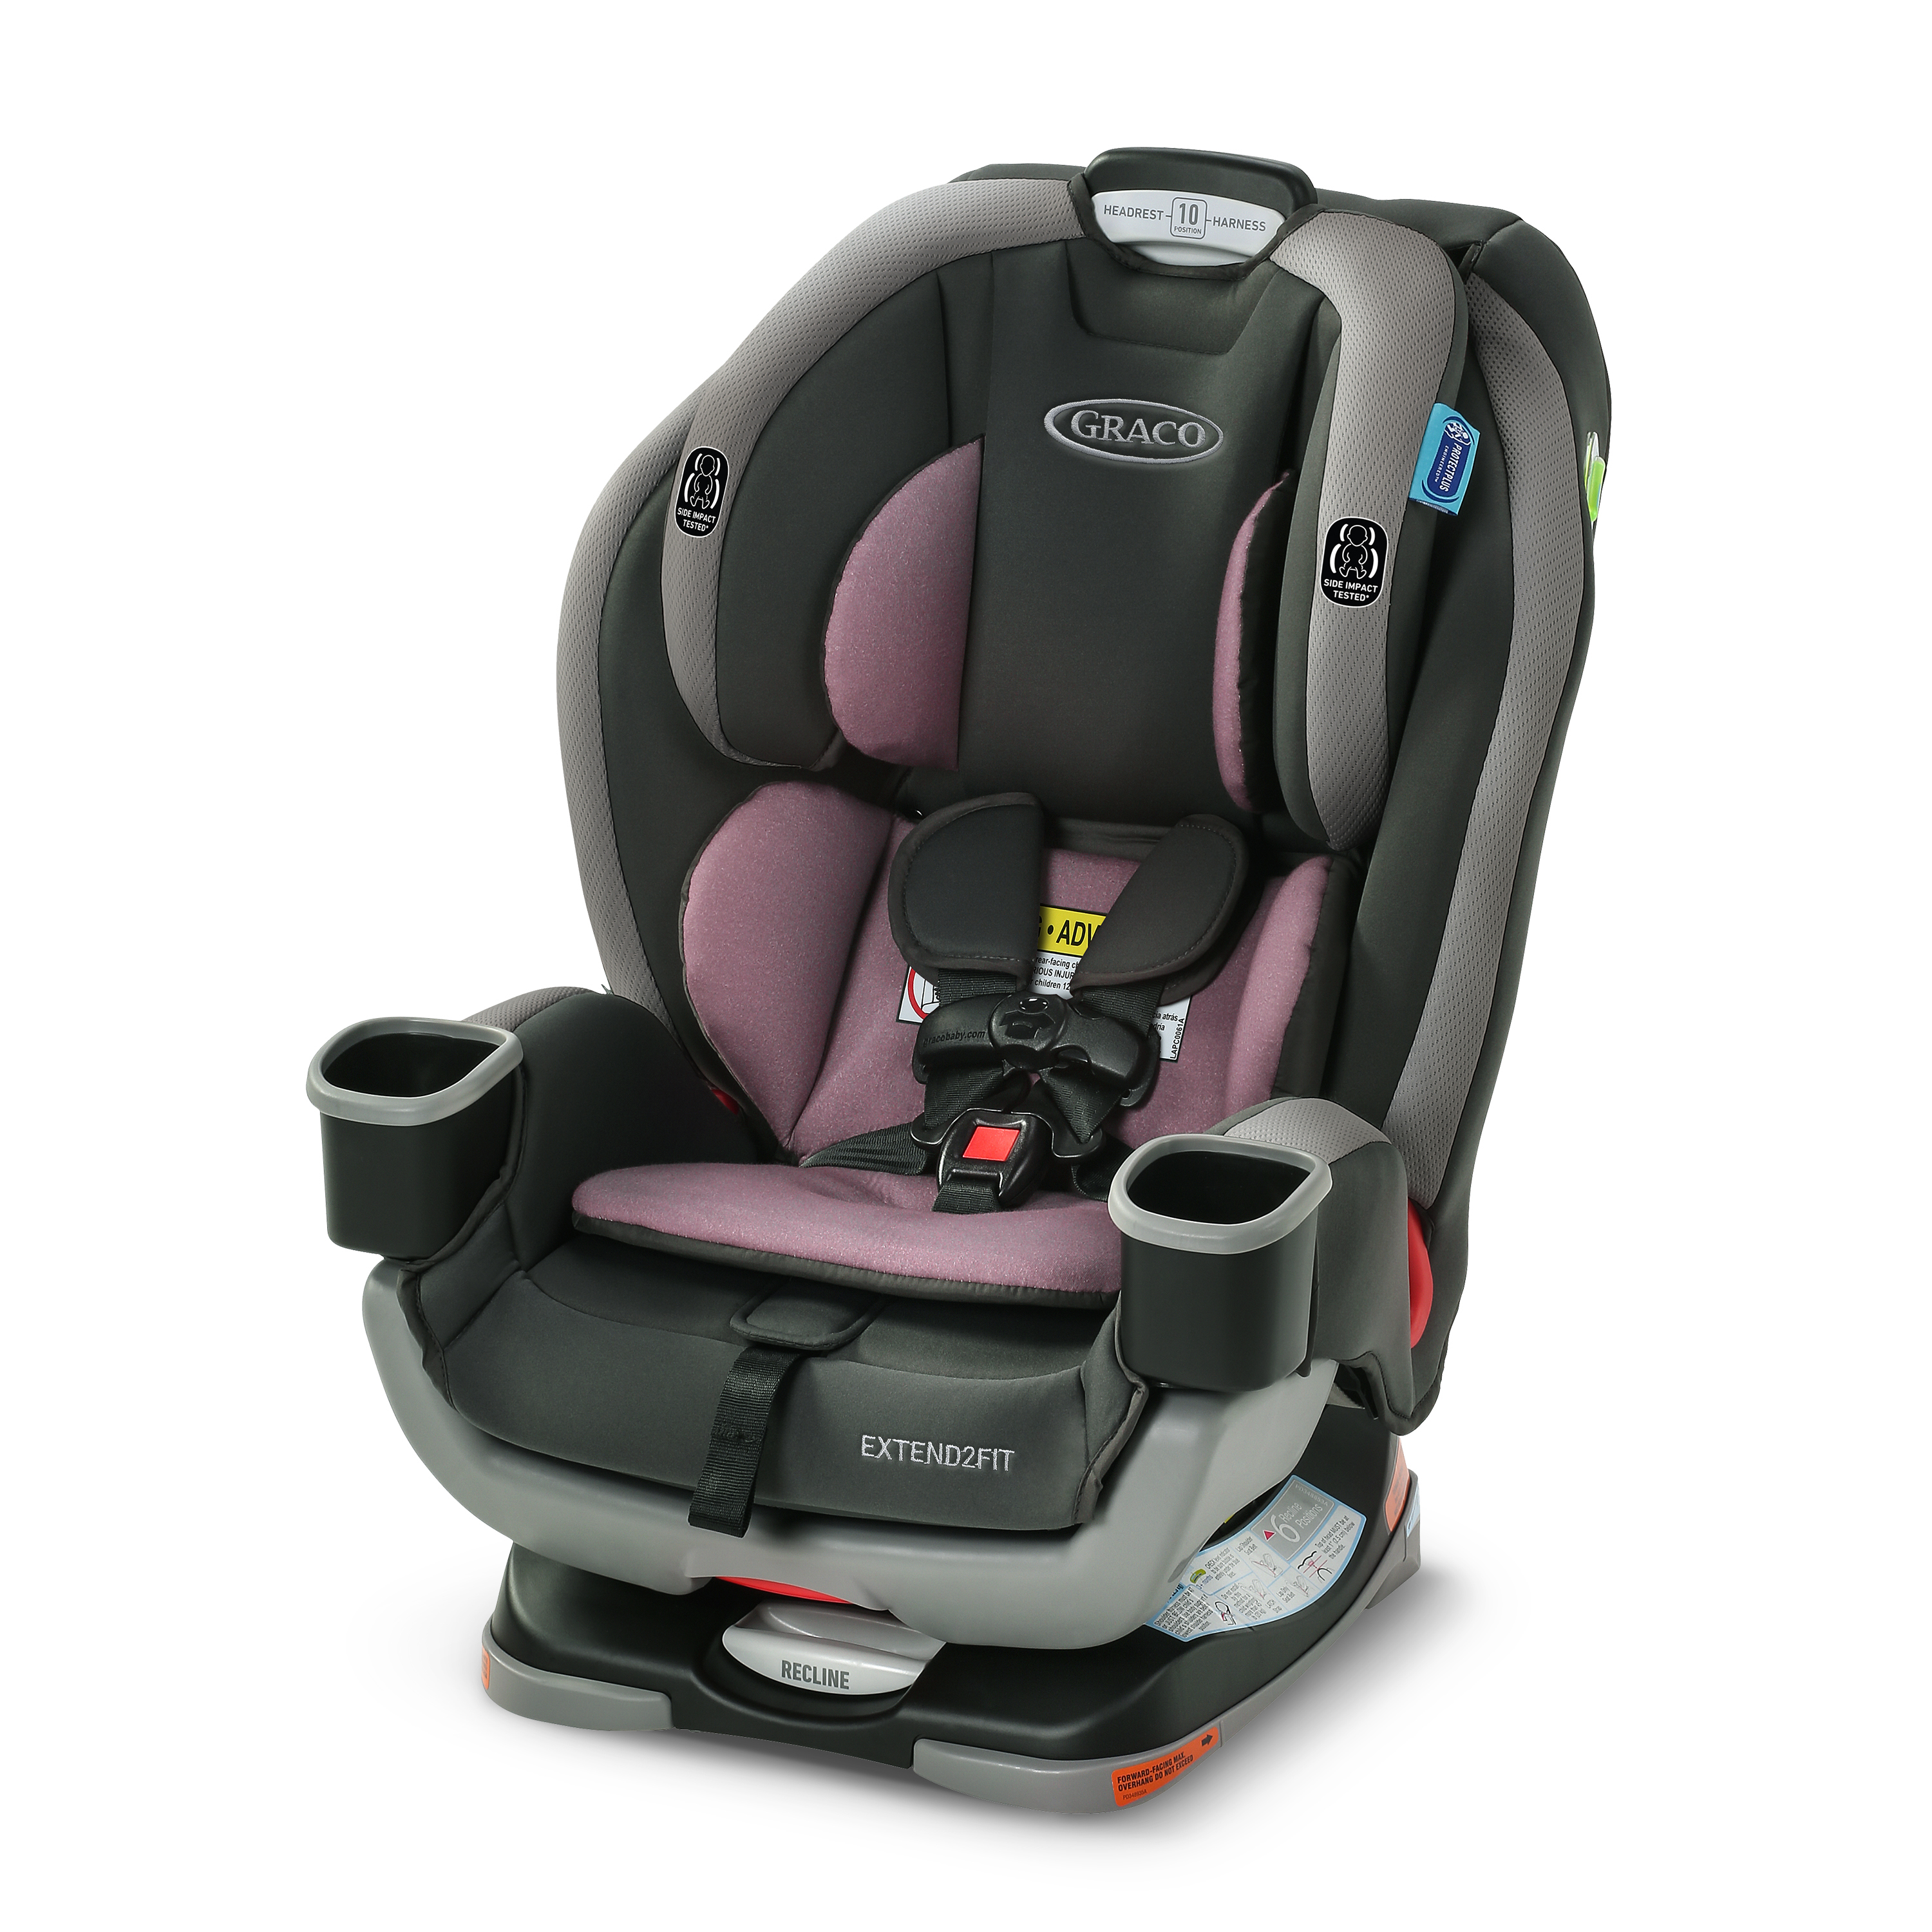 Graco Extend2Fit® 3-in-1 Convertible Car Seat, Norah - image 1 of 7